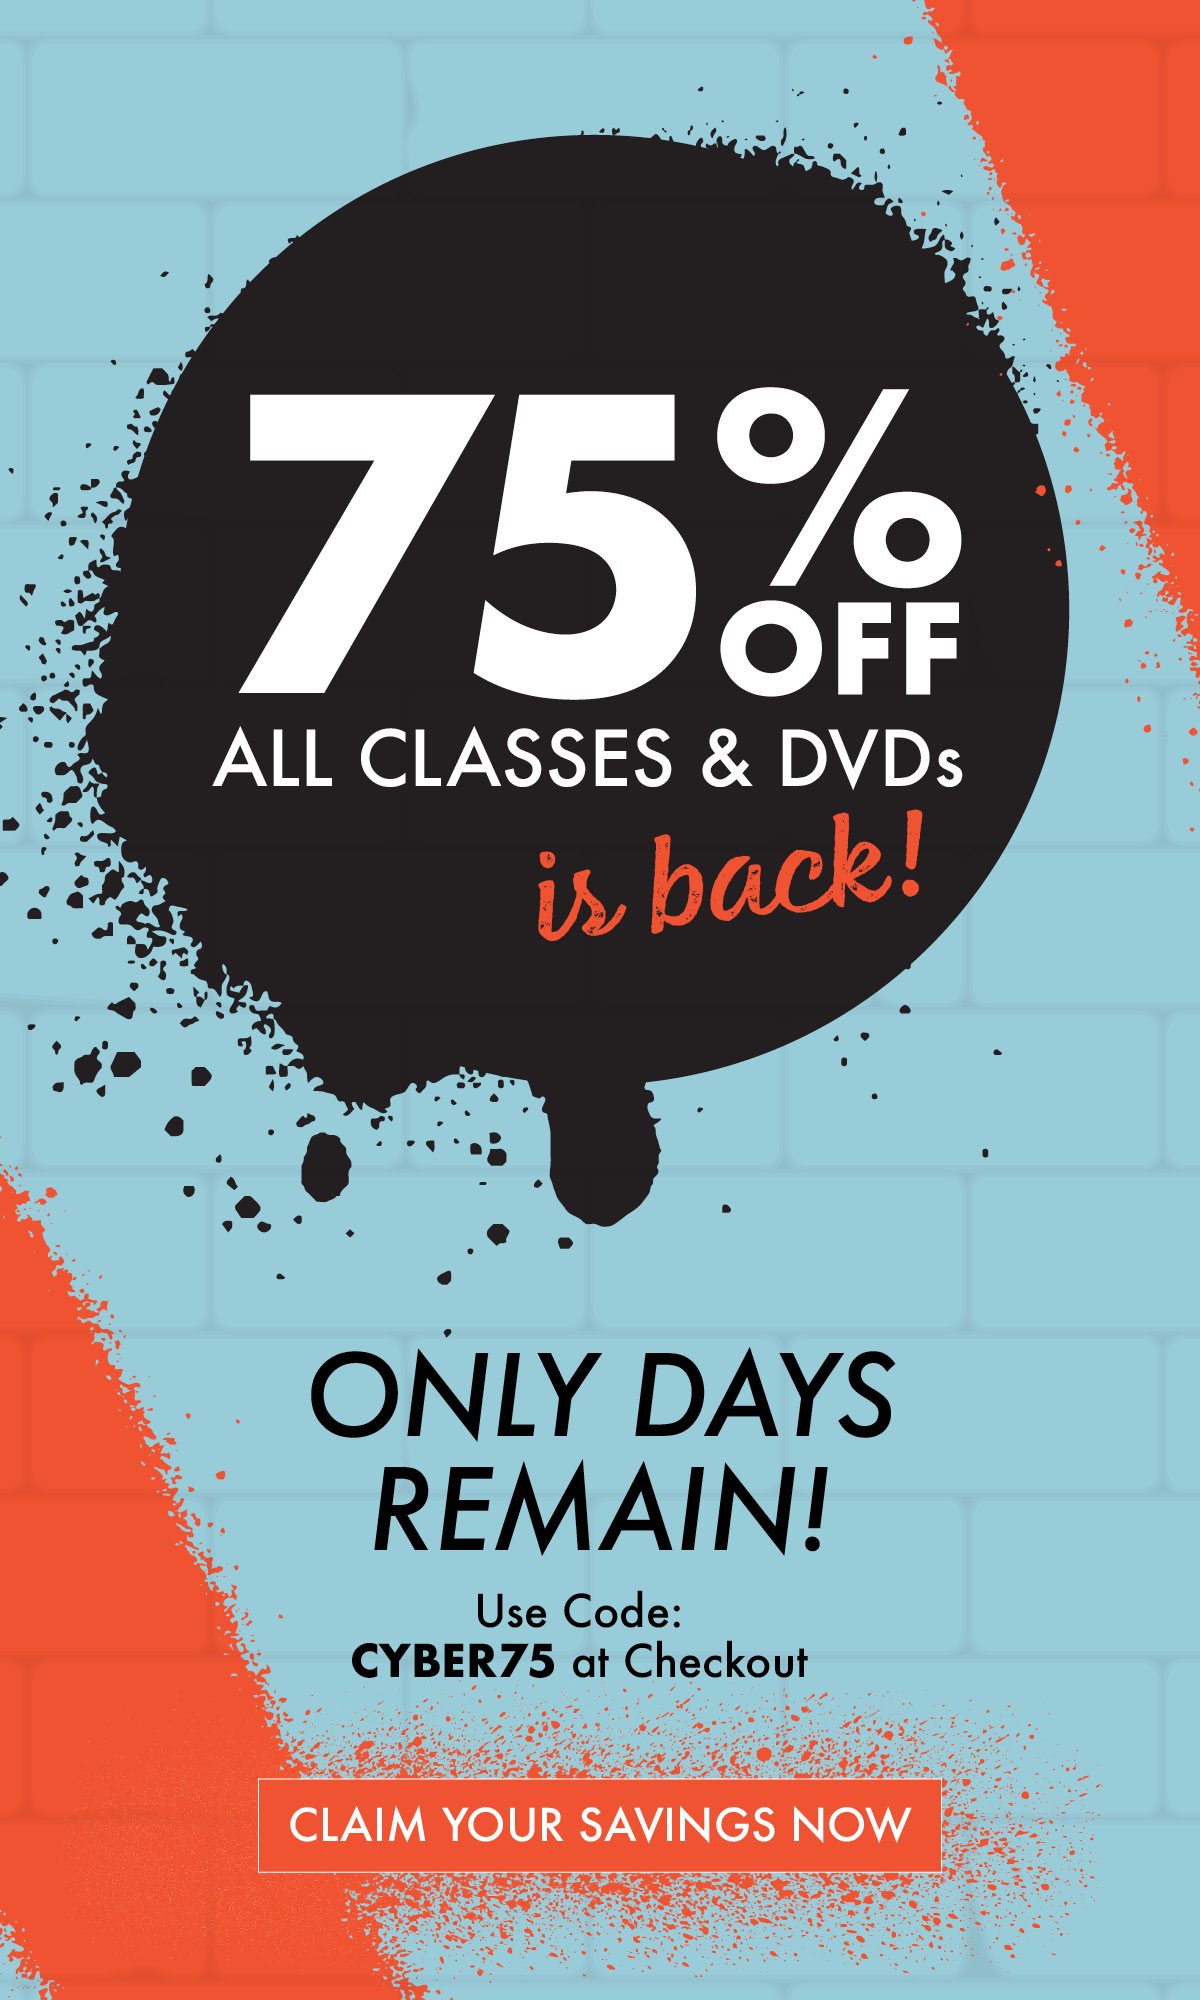 75% OFF ALL CLASSES & DVDs  IS BACK, BUT ONLY DAYS REMAIN  Use Code: CYBER75 at Checkout